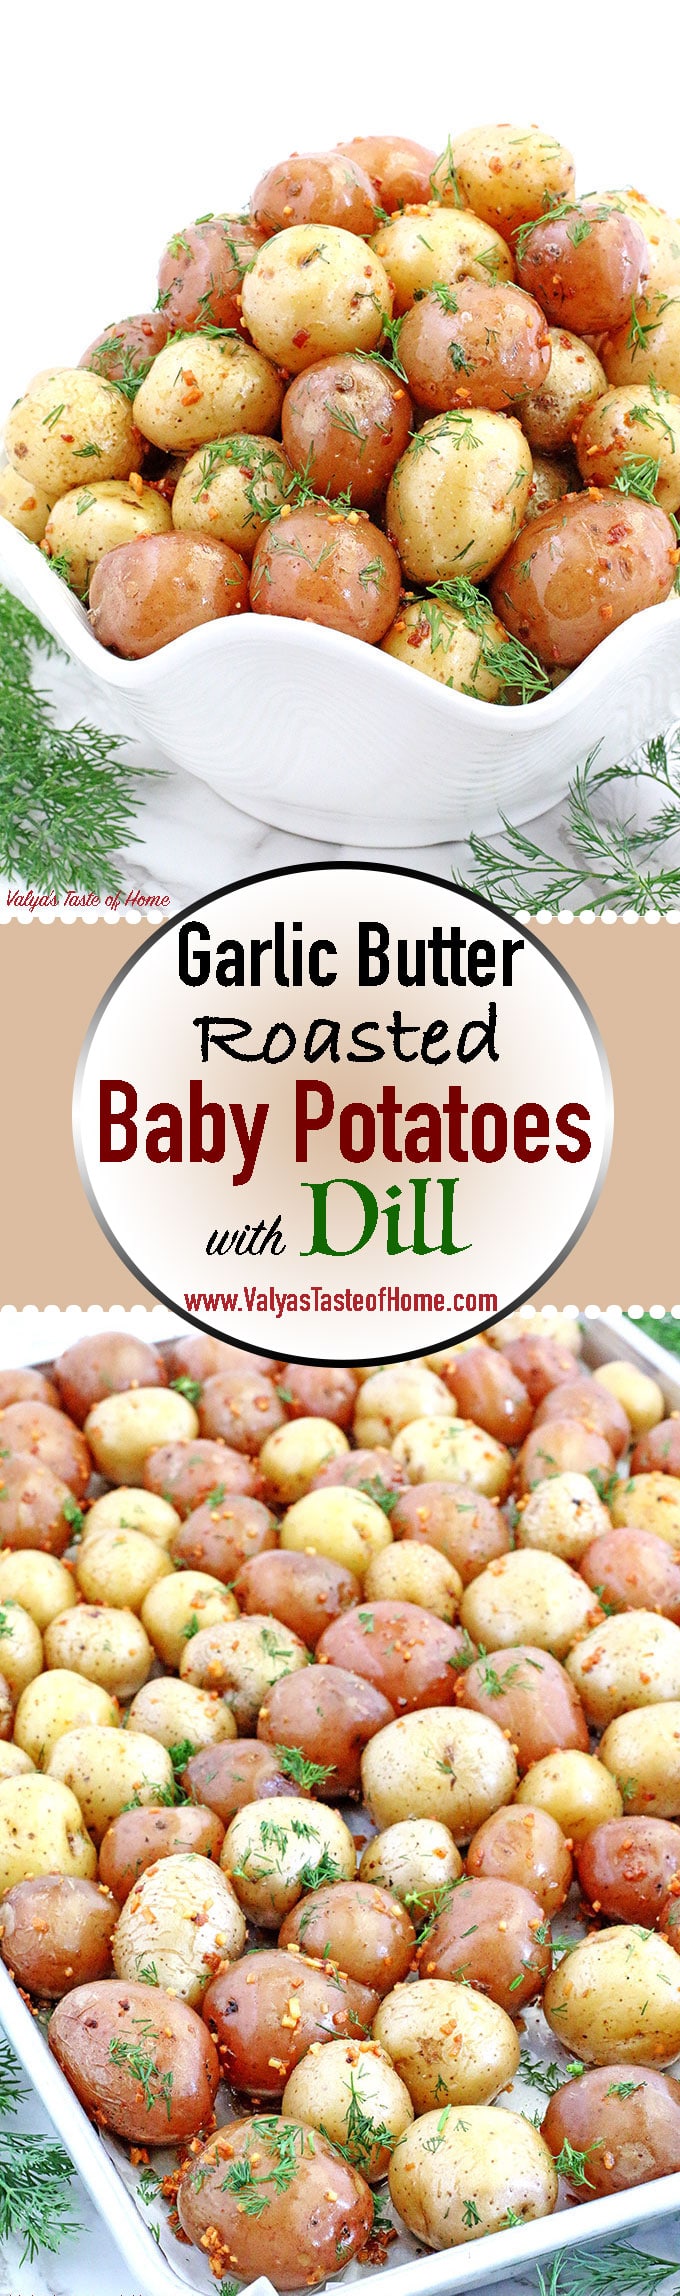 This Garlic Butter Roasted Baby Potatoes with Dill takes approximately thirty minutes to make which makes a perfect side dinner dish, especially during busy days. Kid friendly small in size potatoes coated with garlic butter and sprinkled with fresh dill is not only very attractive but super tasty as well! | www.valyastasteofhome.com